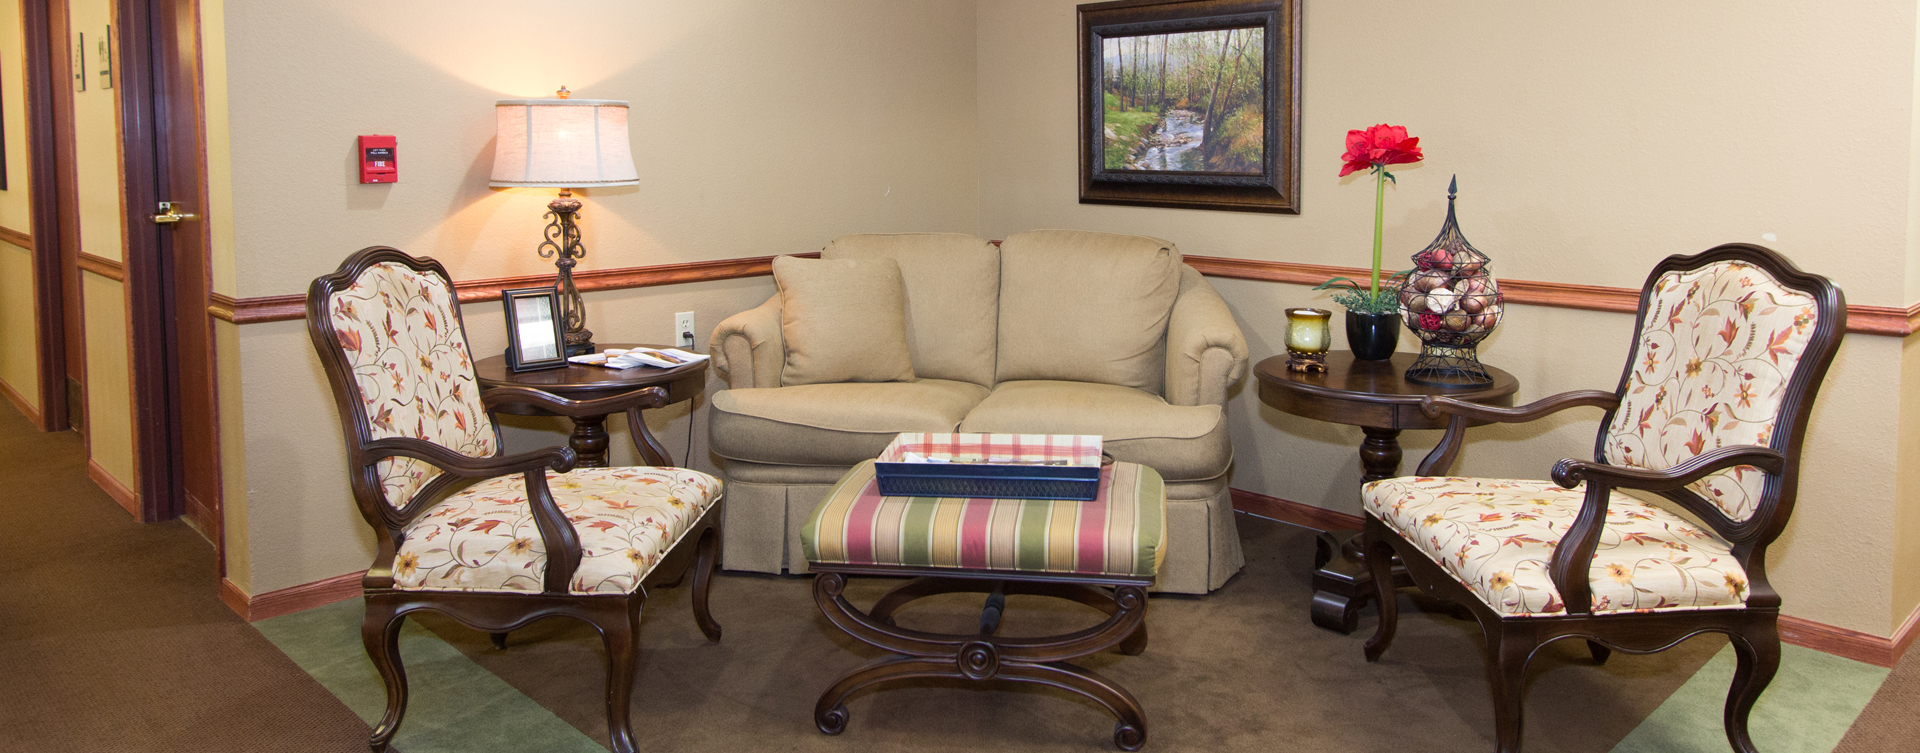 Enjoy a good snooze in the sitting area at Bickford of Bourbonnais